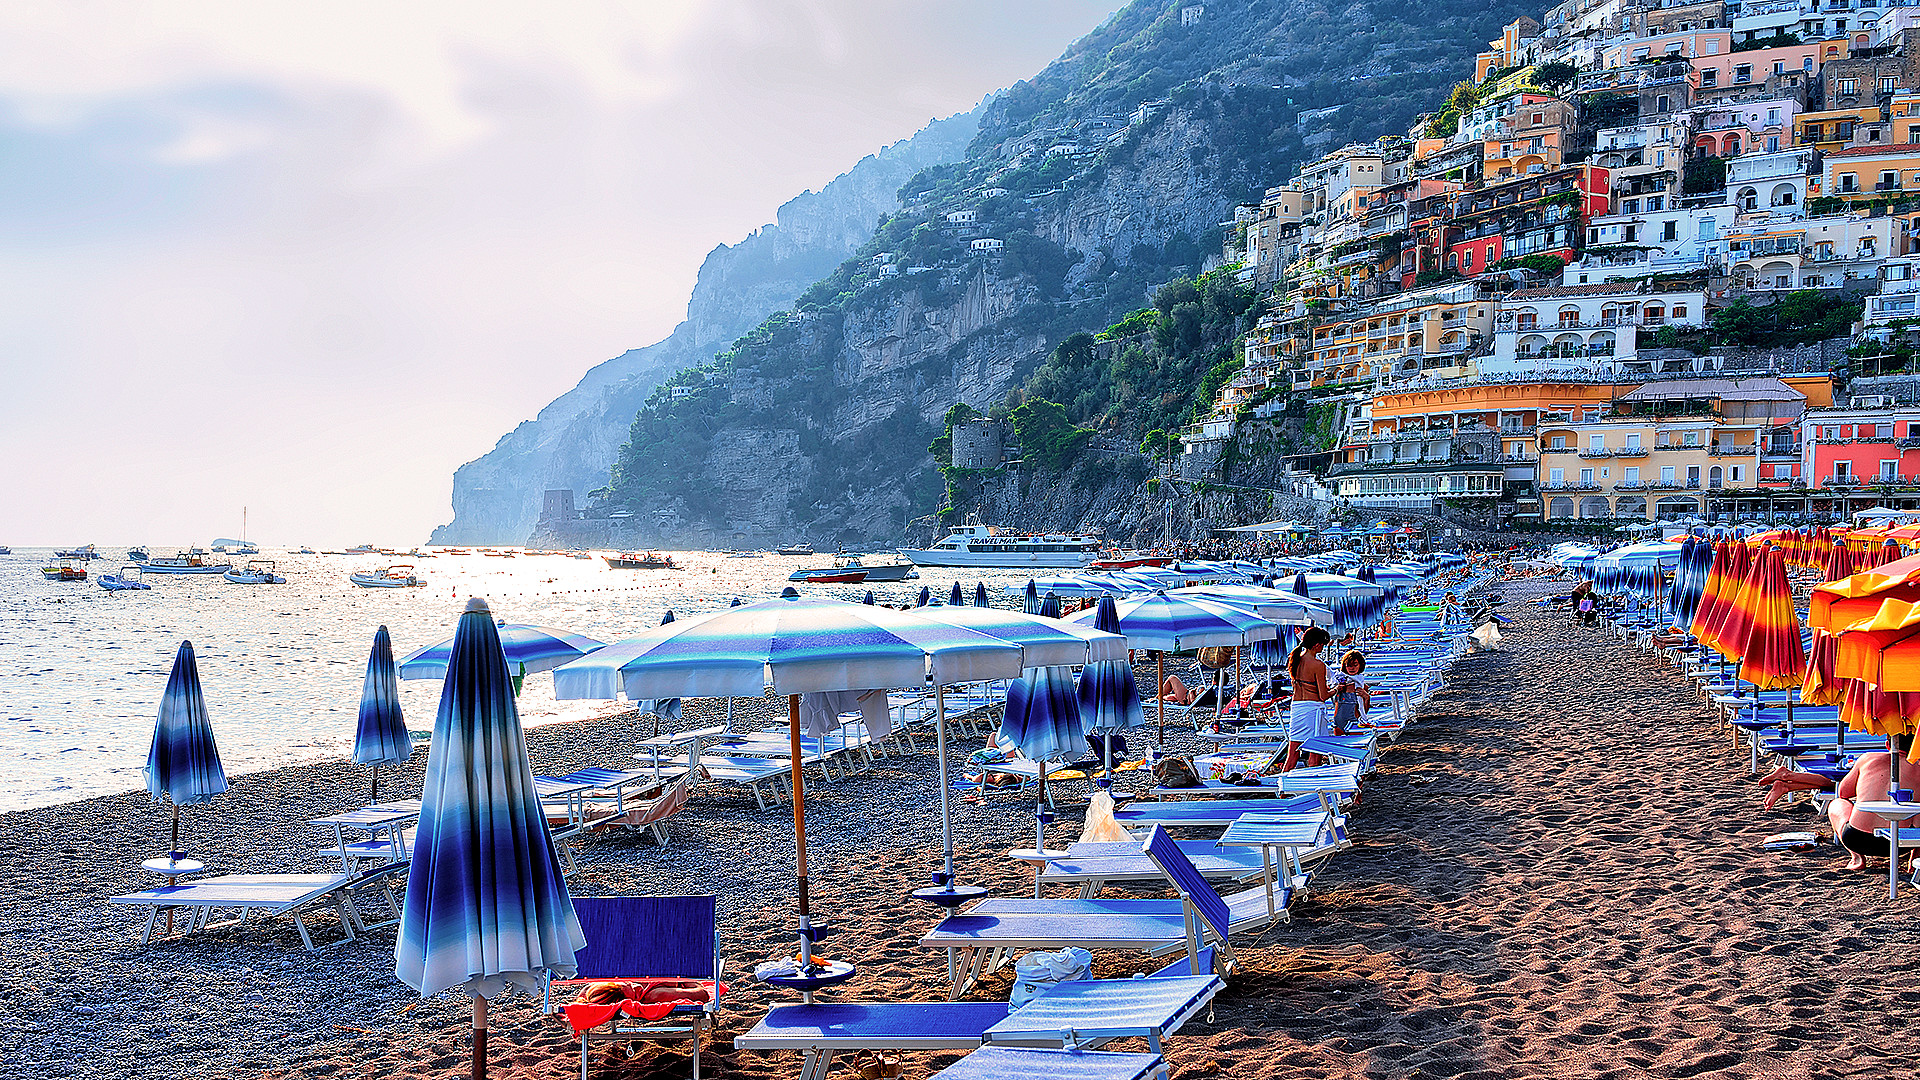 What to know if it’s your first time in Positano